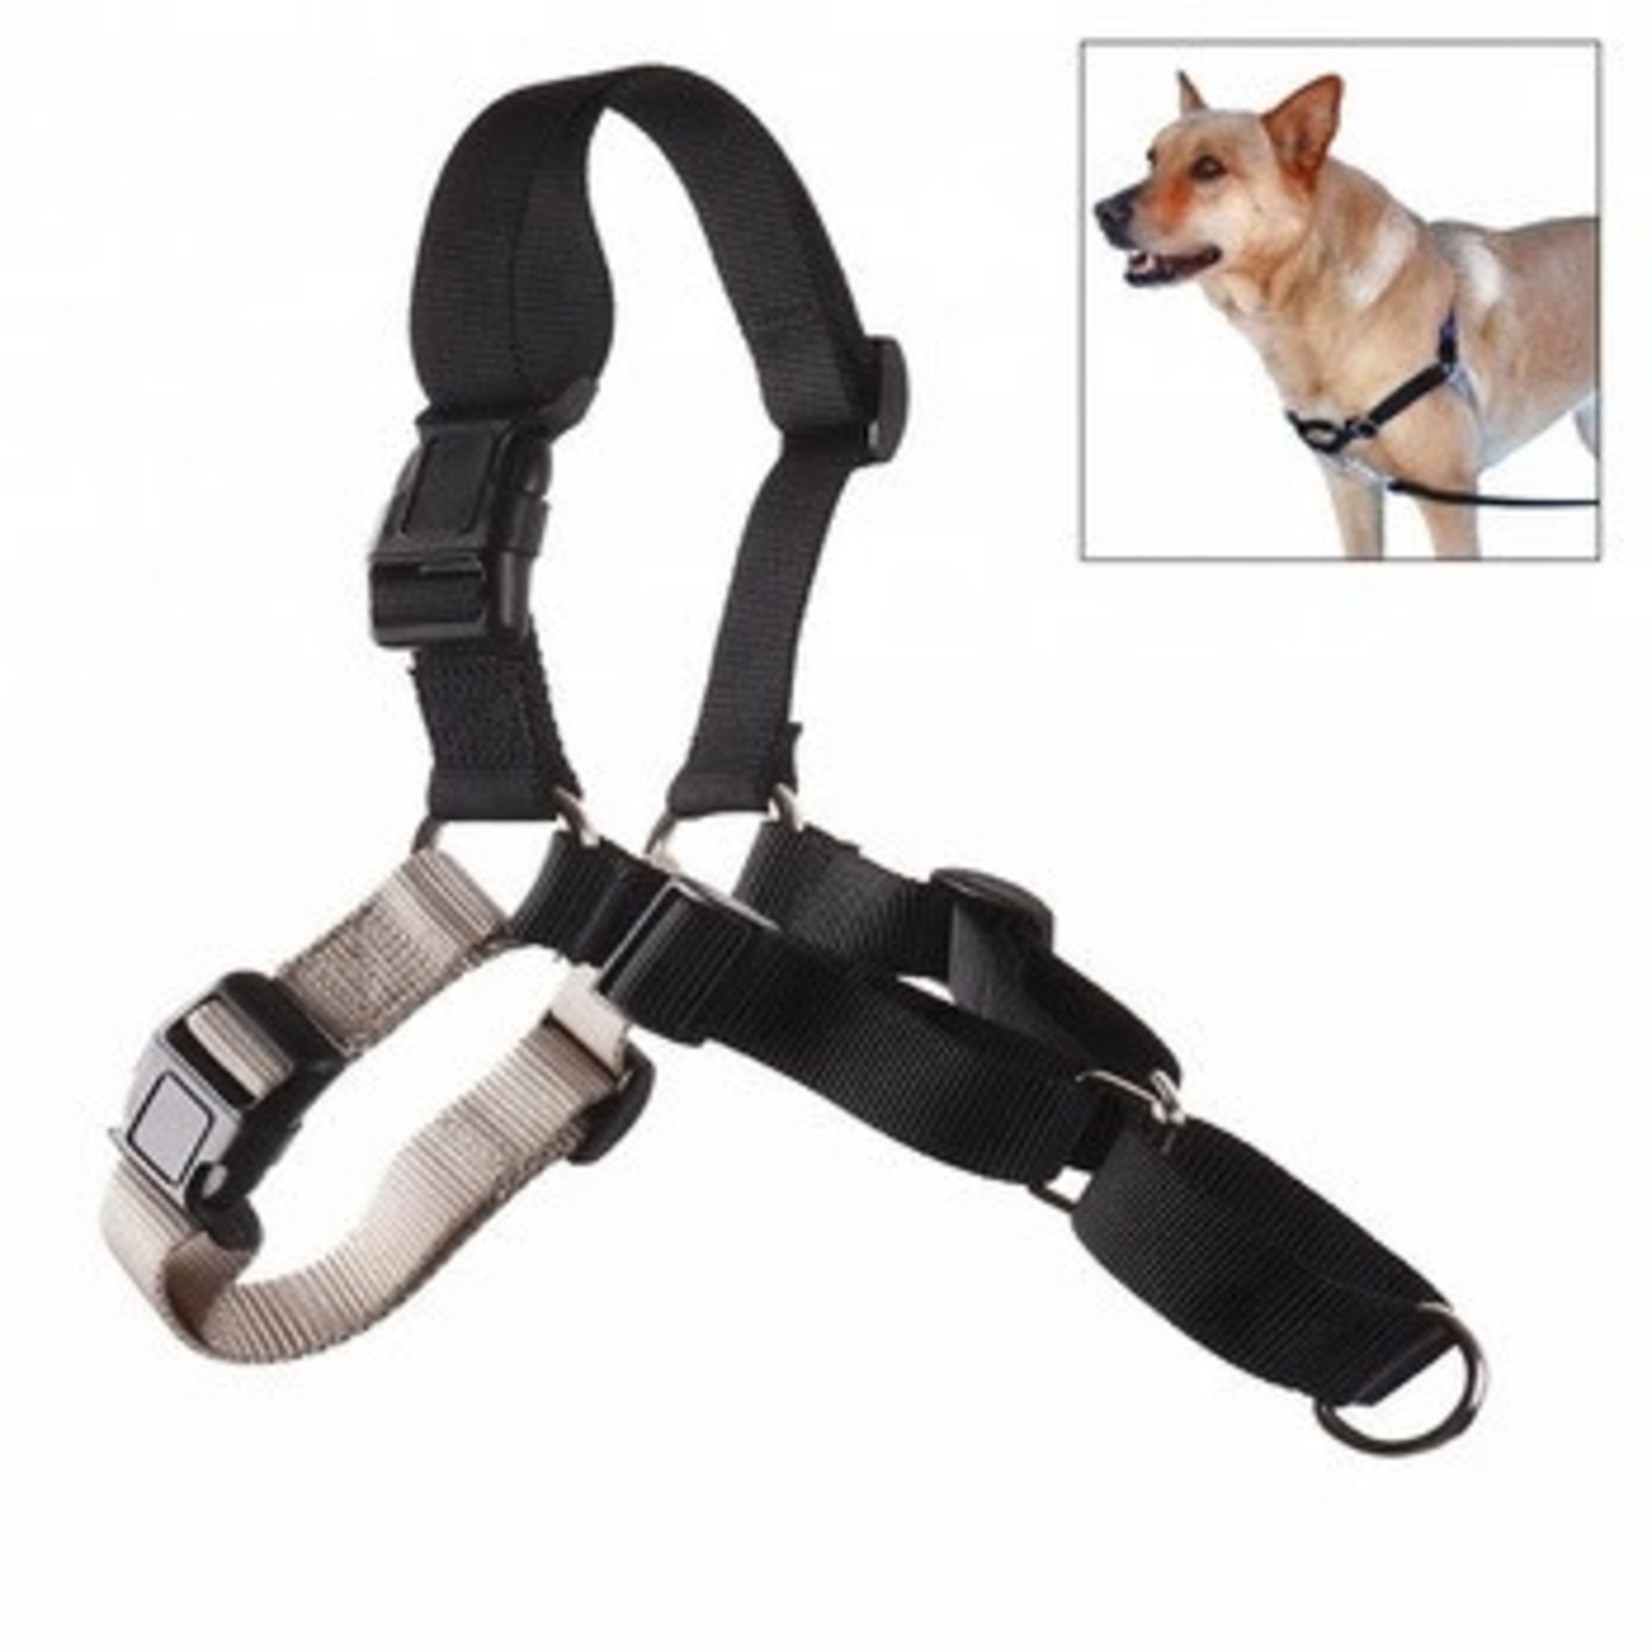 Pet Safe / Radio Systems Corp. Easy Walk Harness Black Large